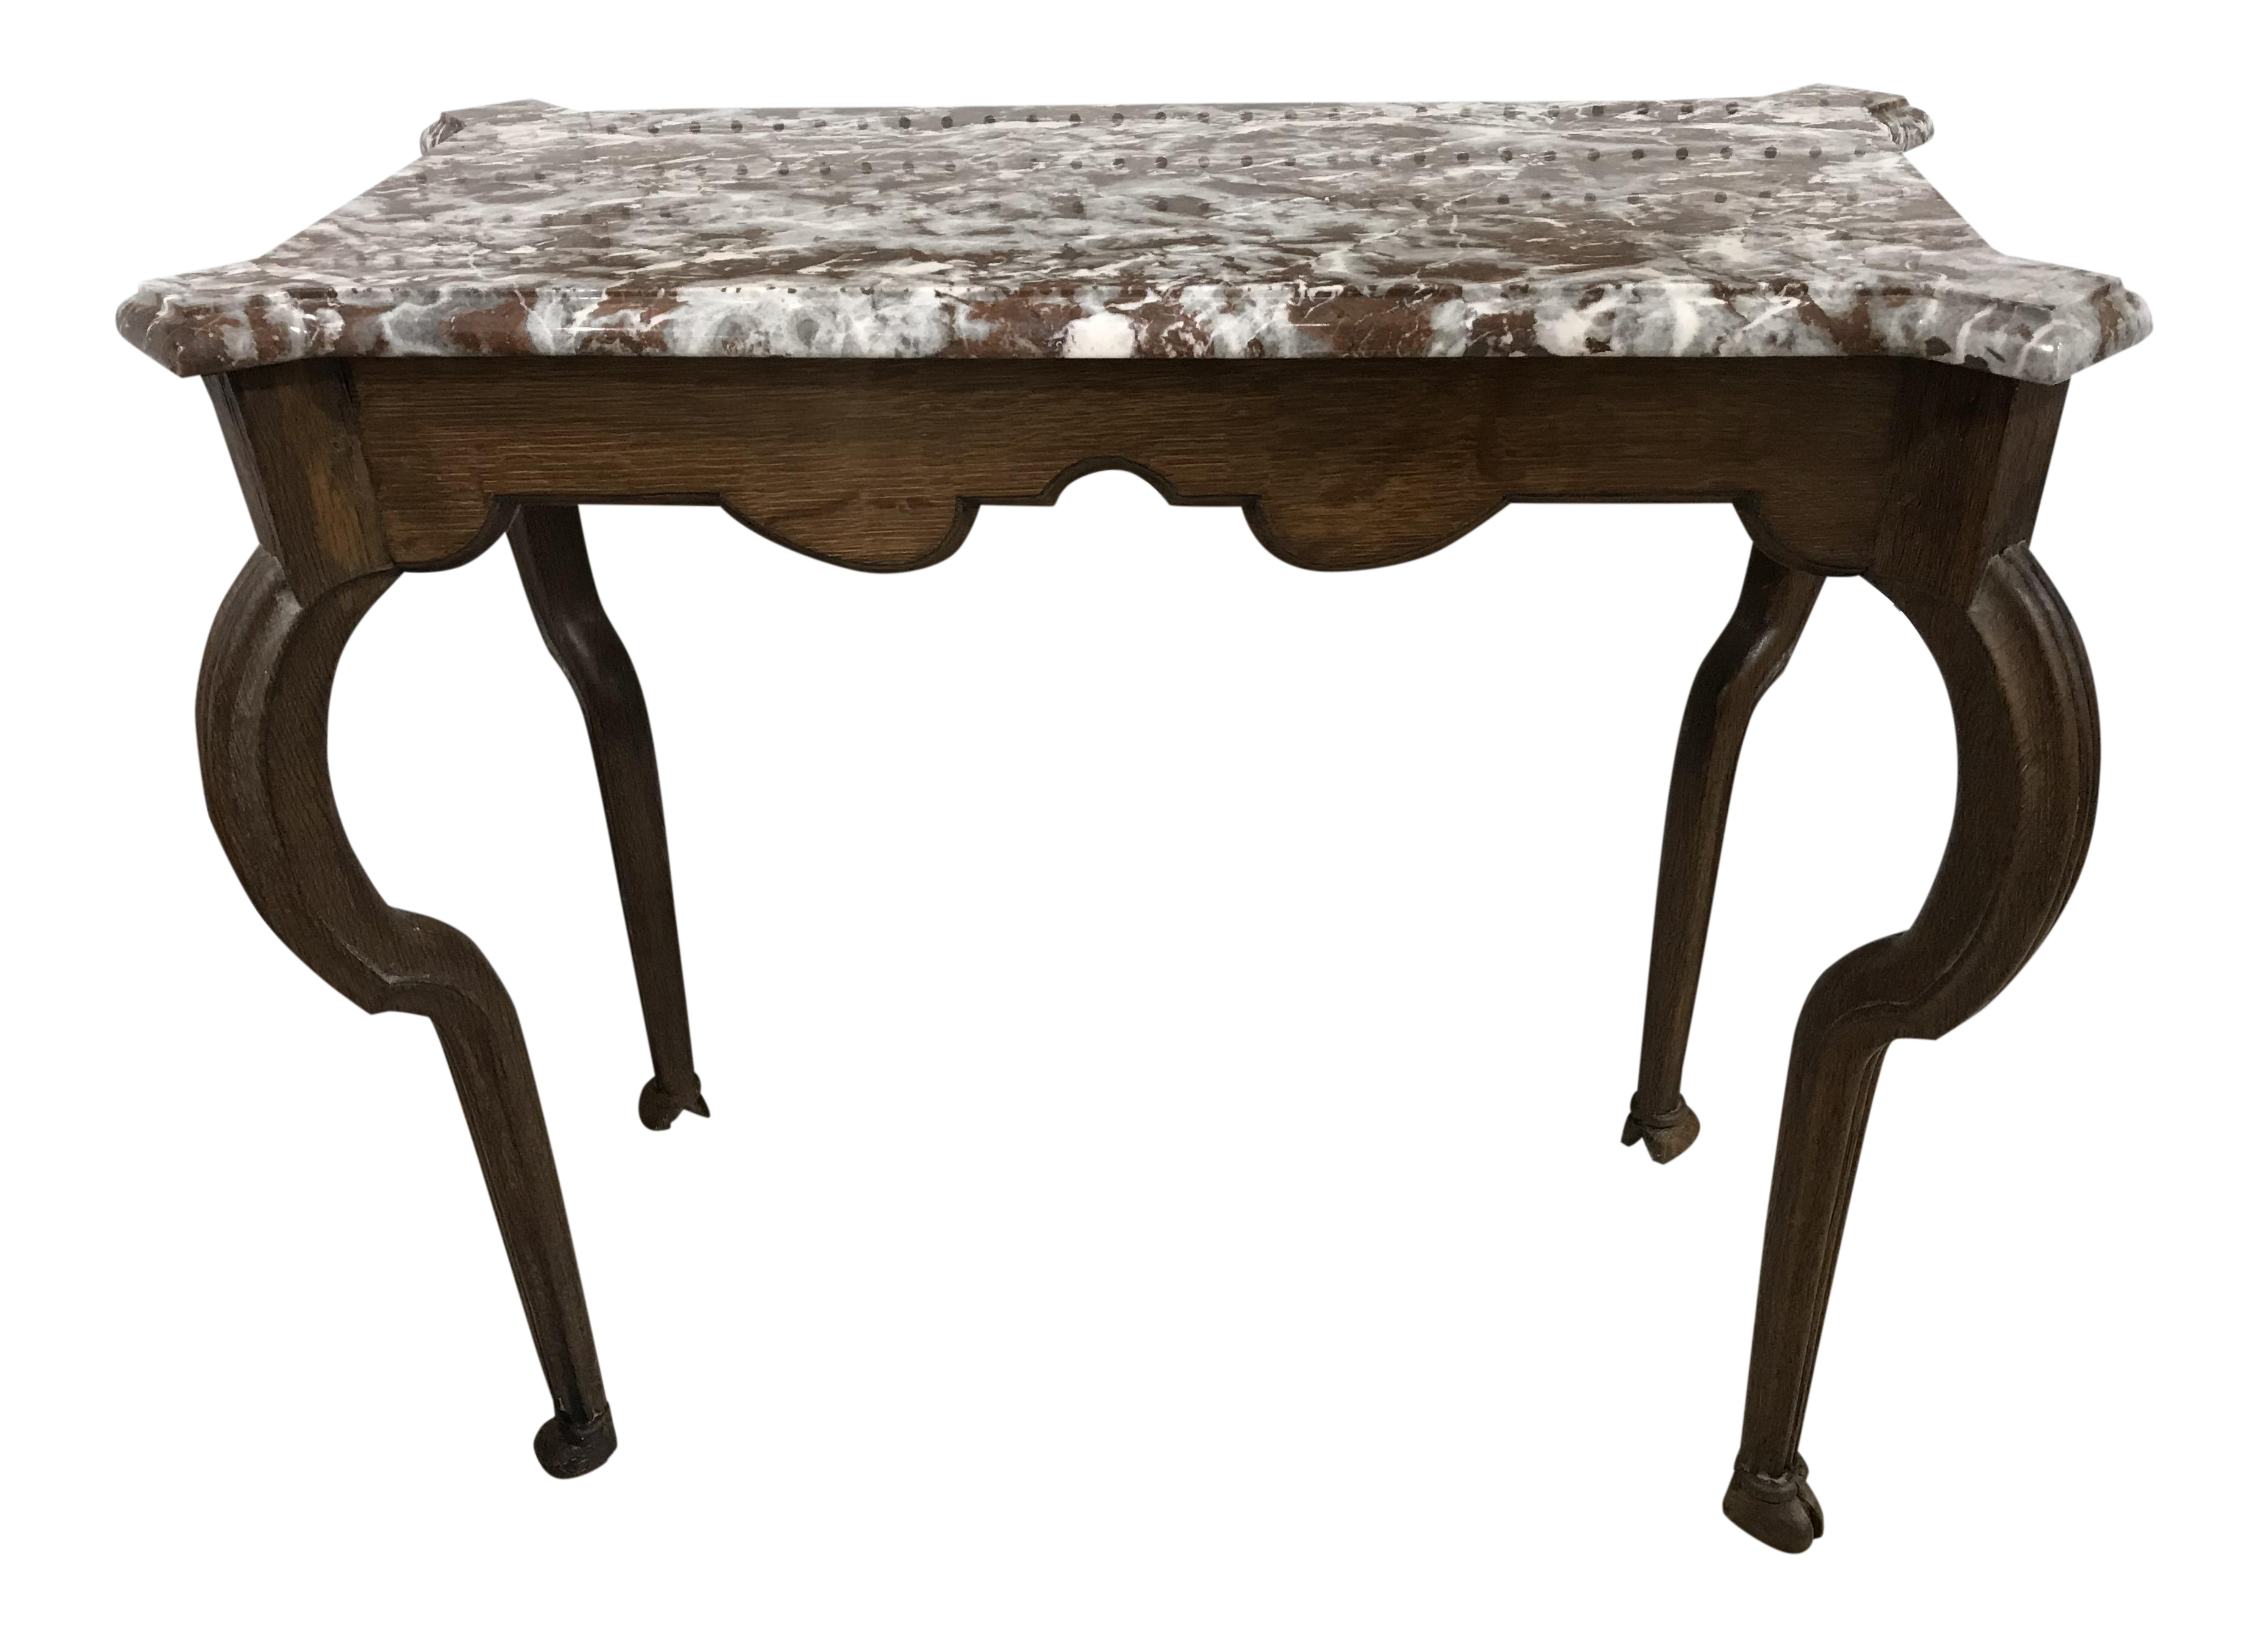 gently used vintage queen anne furniture for chairish portuguese oak marble top console table antique small accent tables ashley nesting red lamp inch hairpin legs white farmhouse